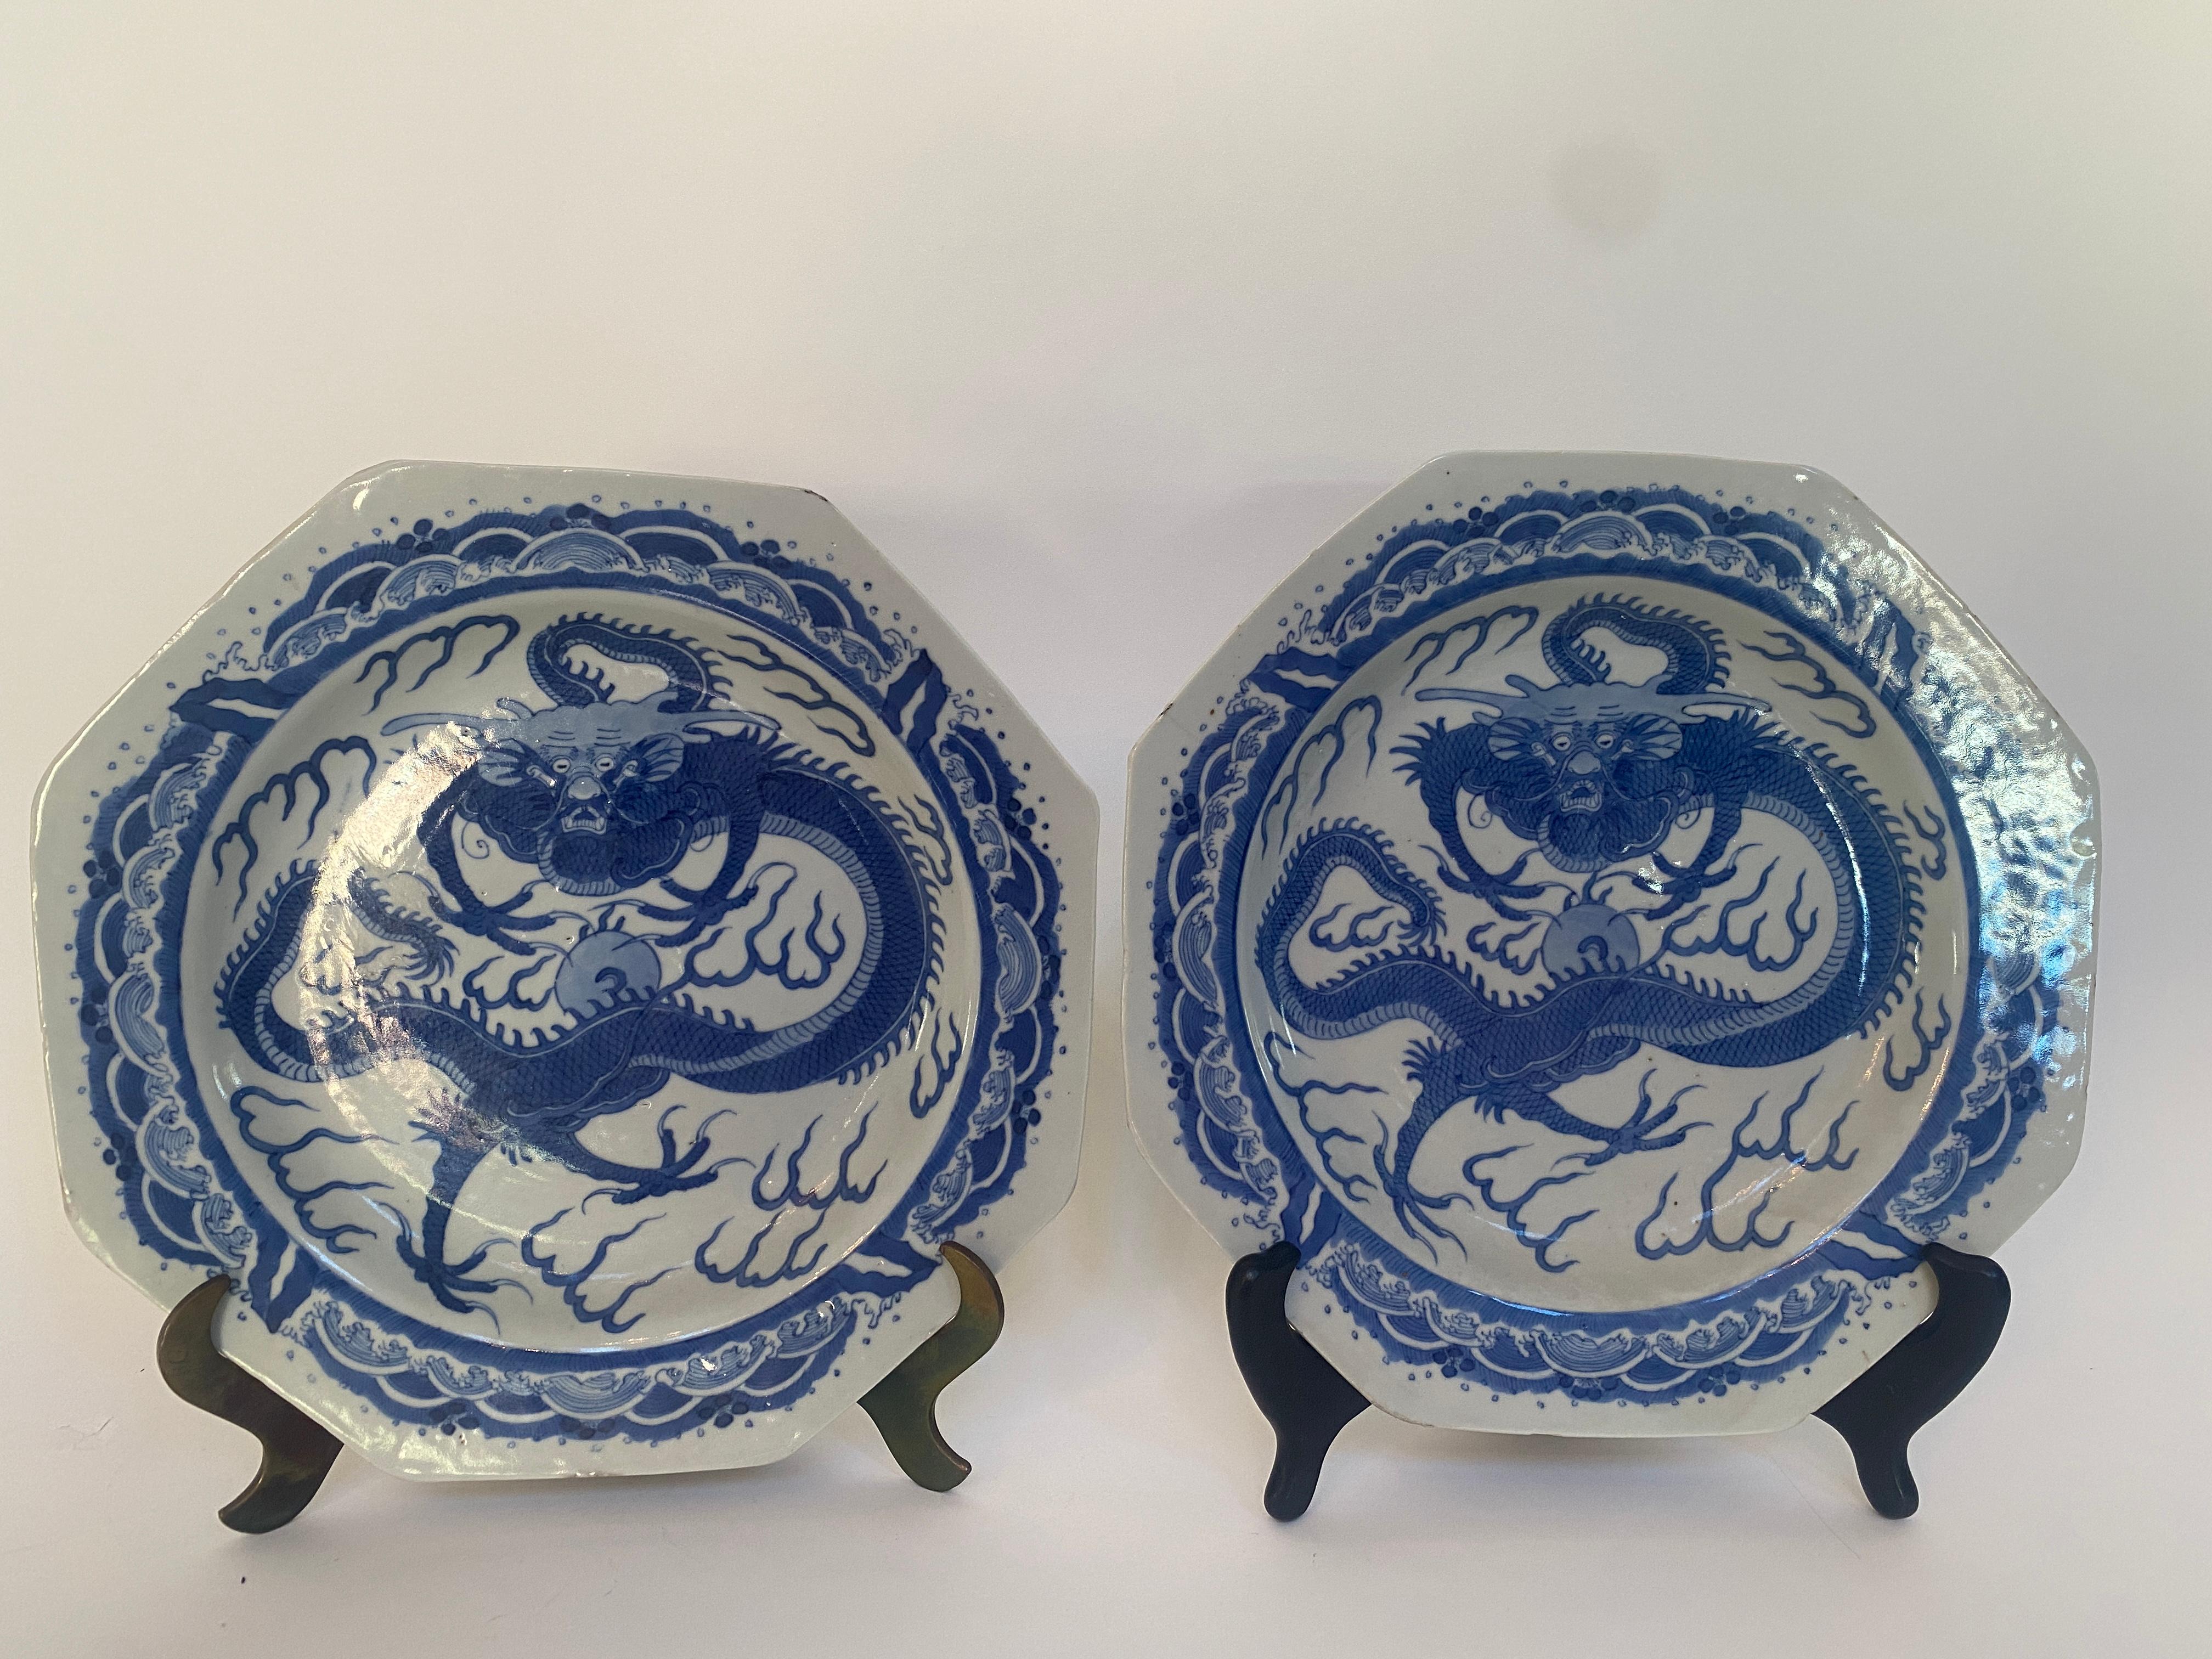 Qing Dynasty Pair of Chinese Blue and White Octagonal Porcelain Dragon Plates For Sale 3